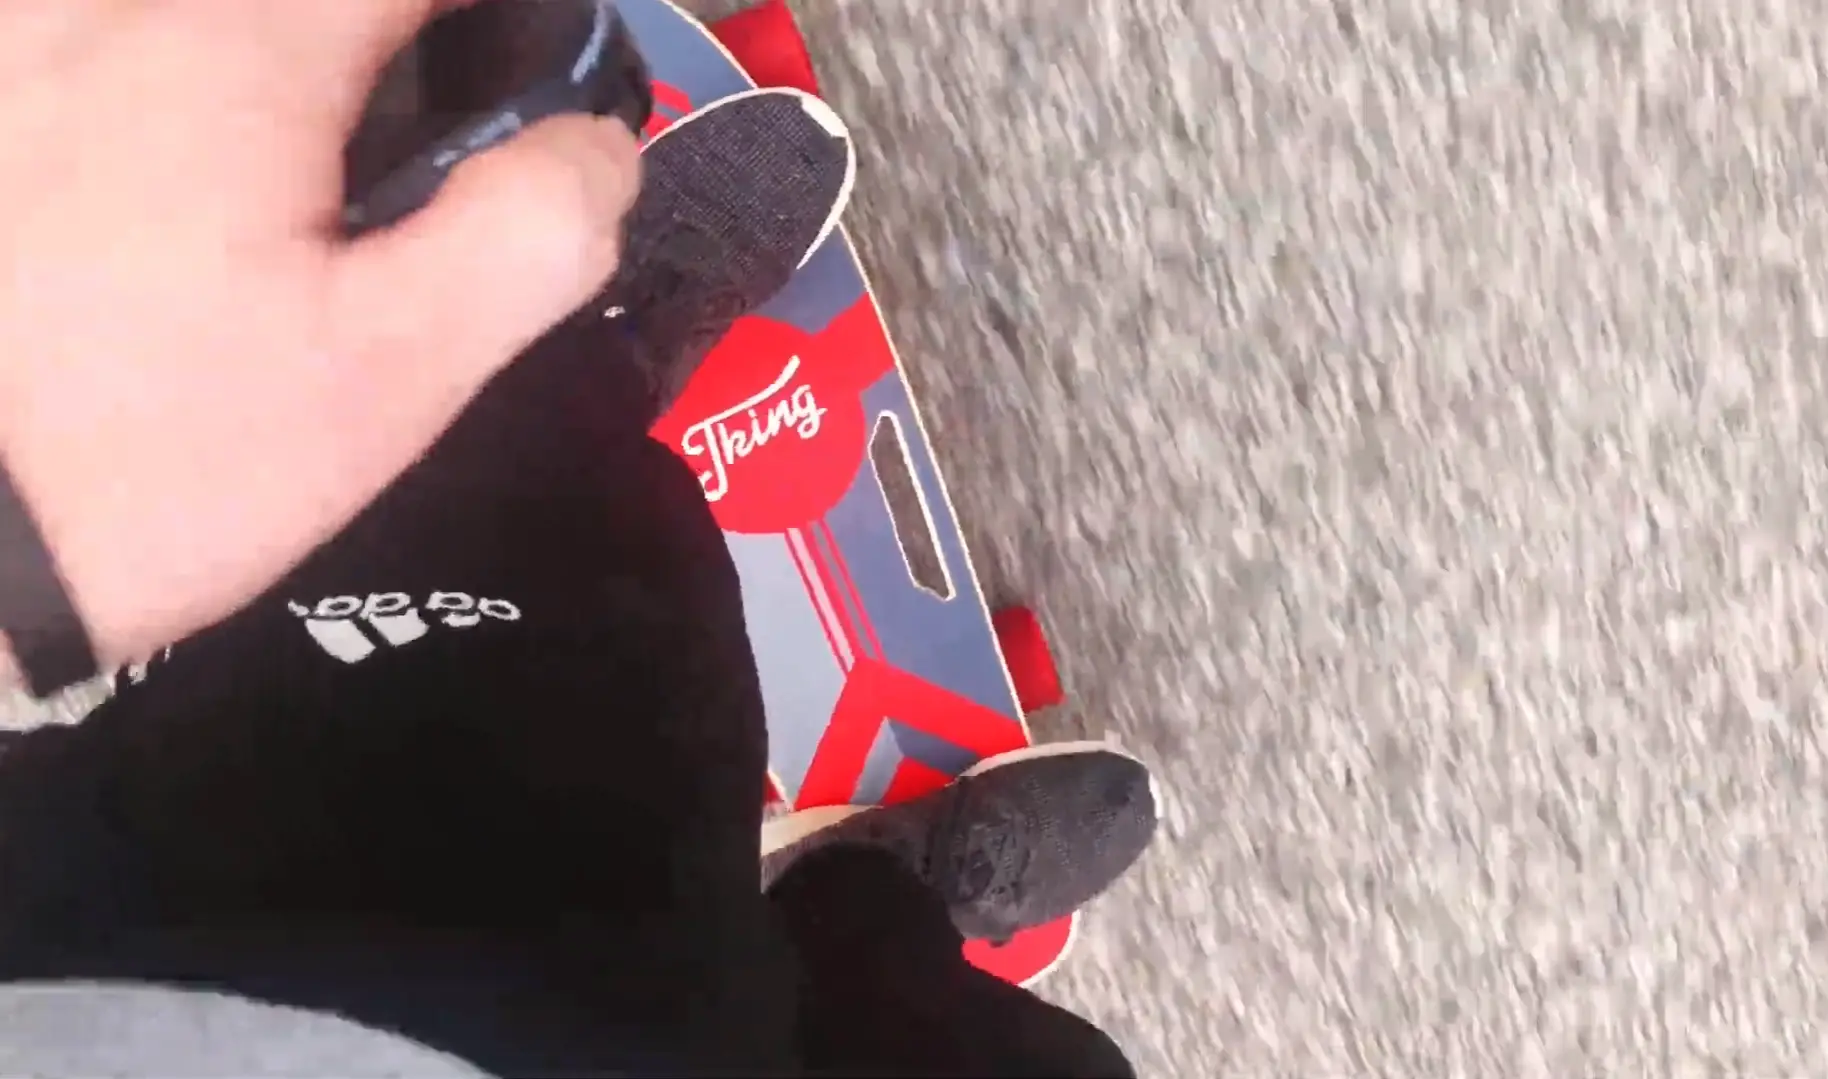 Riding on a Caroma Electric Skateboard with remote